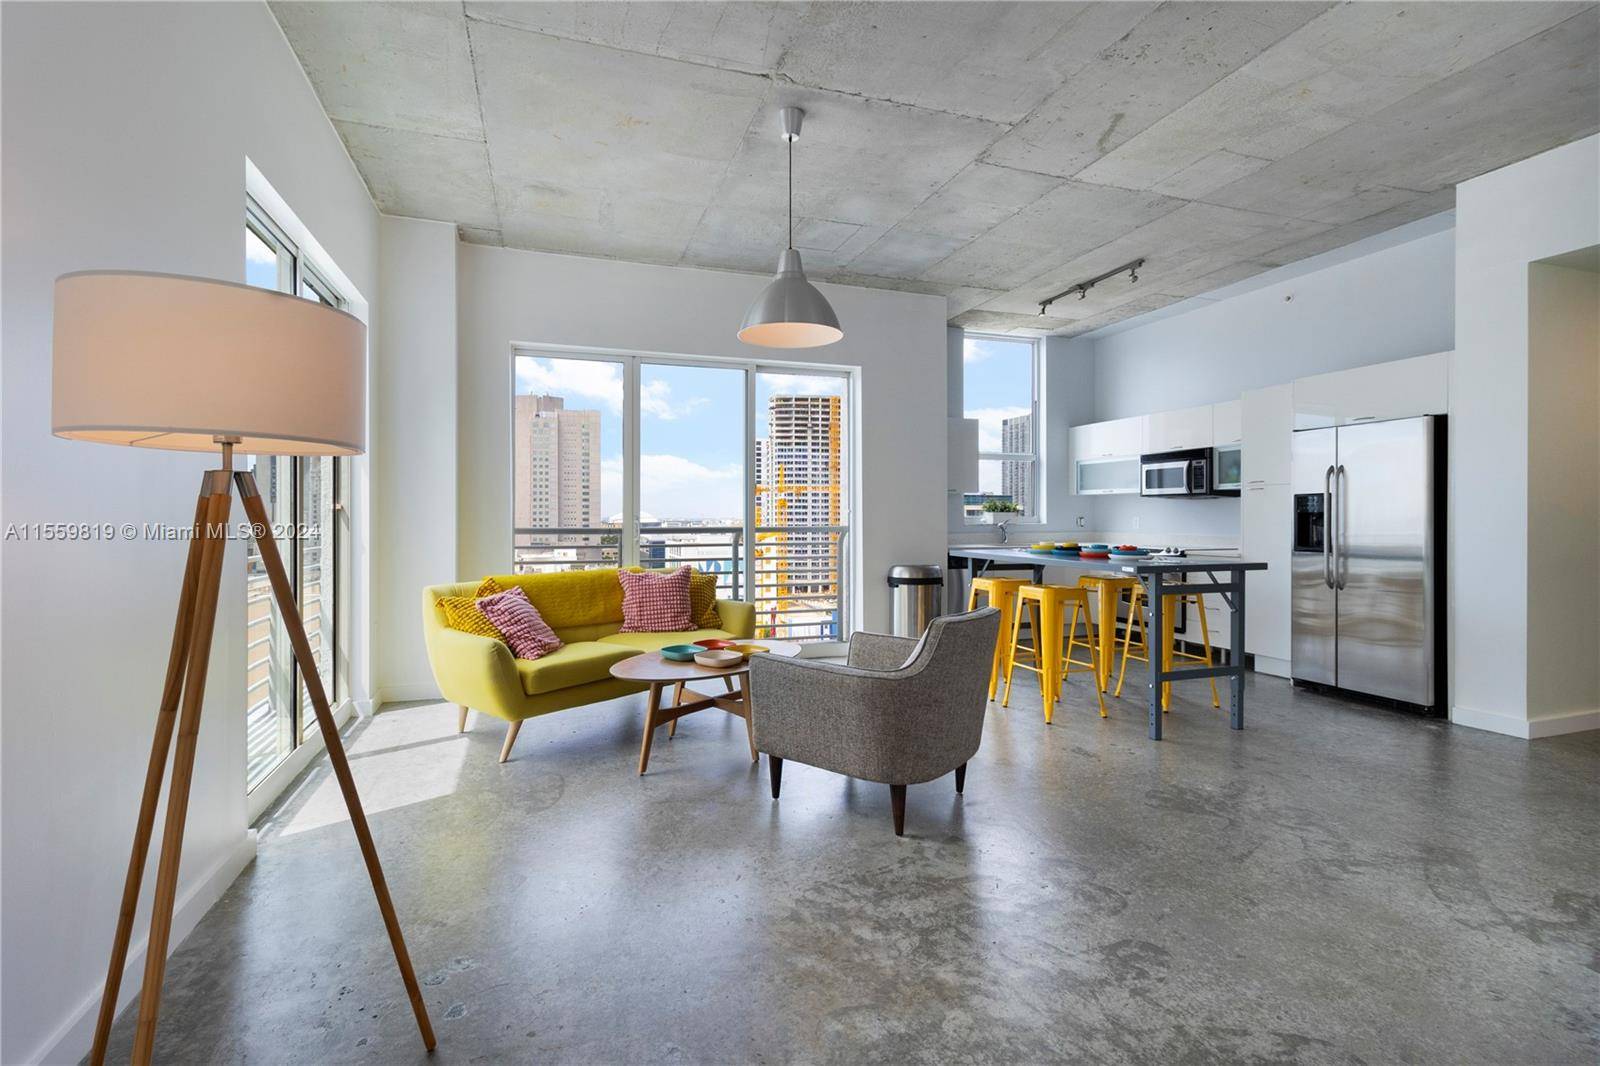 Discover the best of Miami in this spacious, open concept corner unit at The Loft Downtown II.